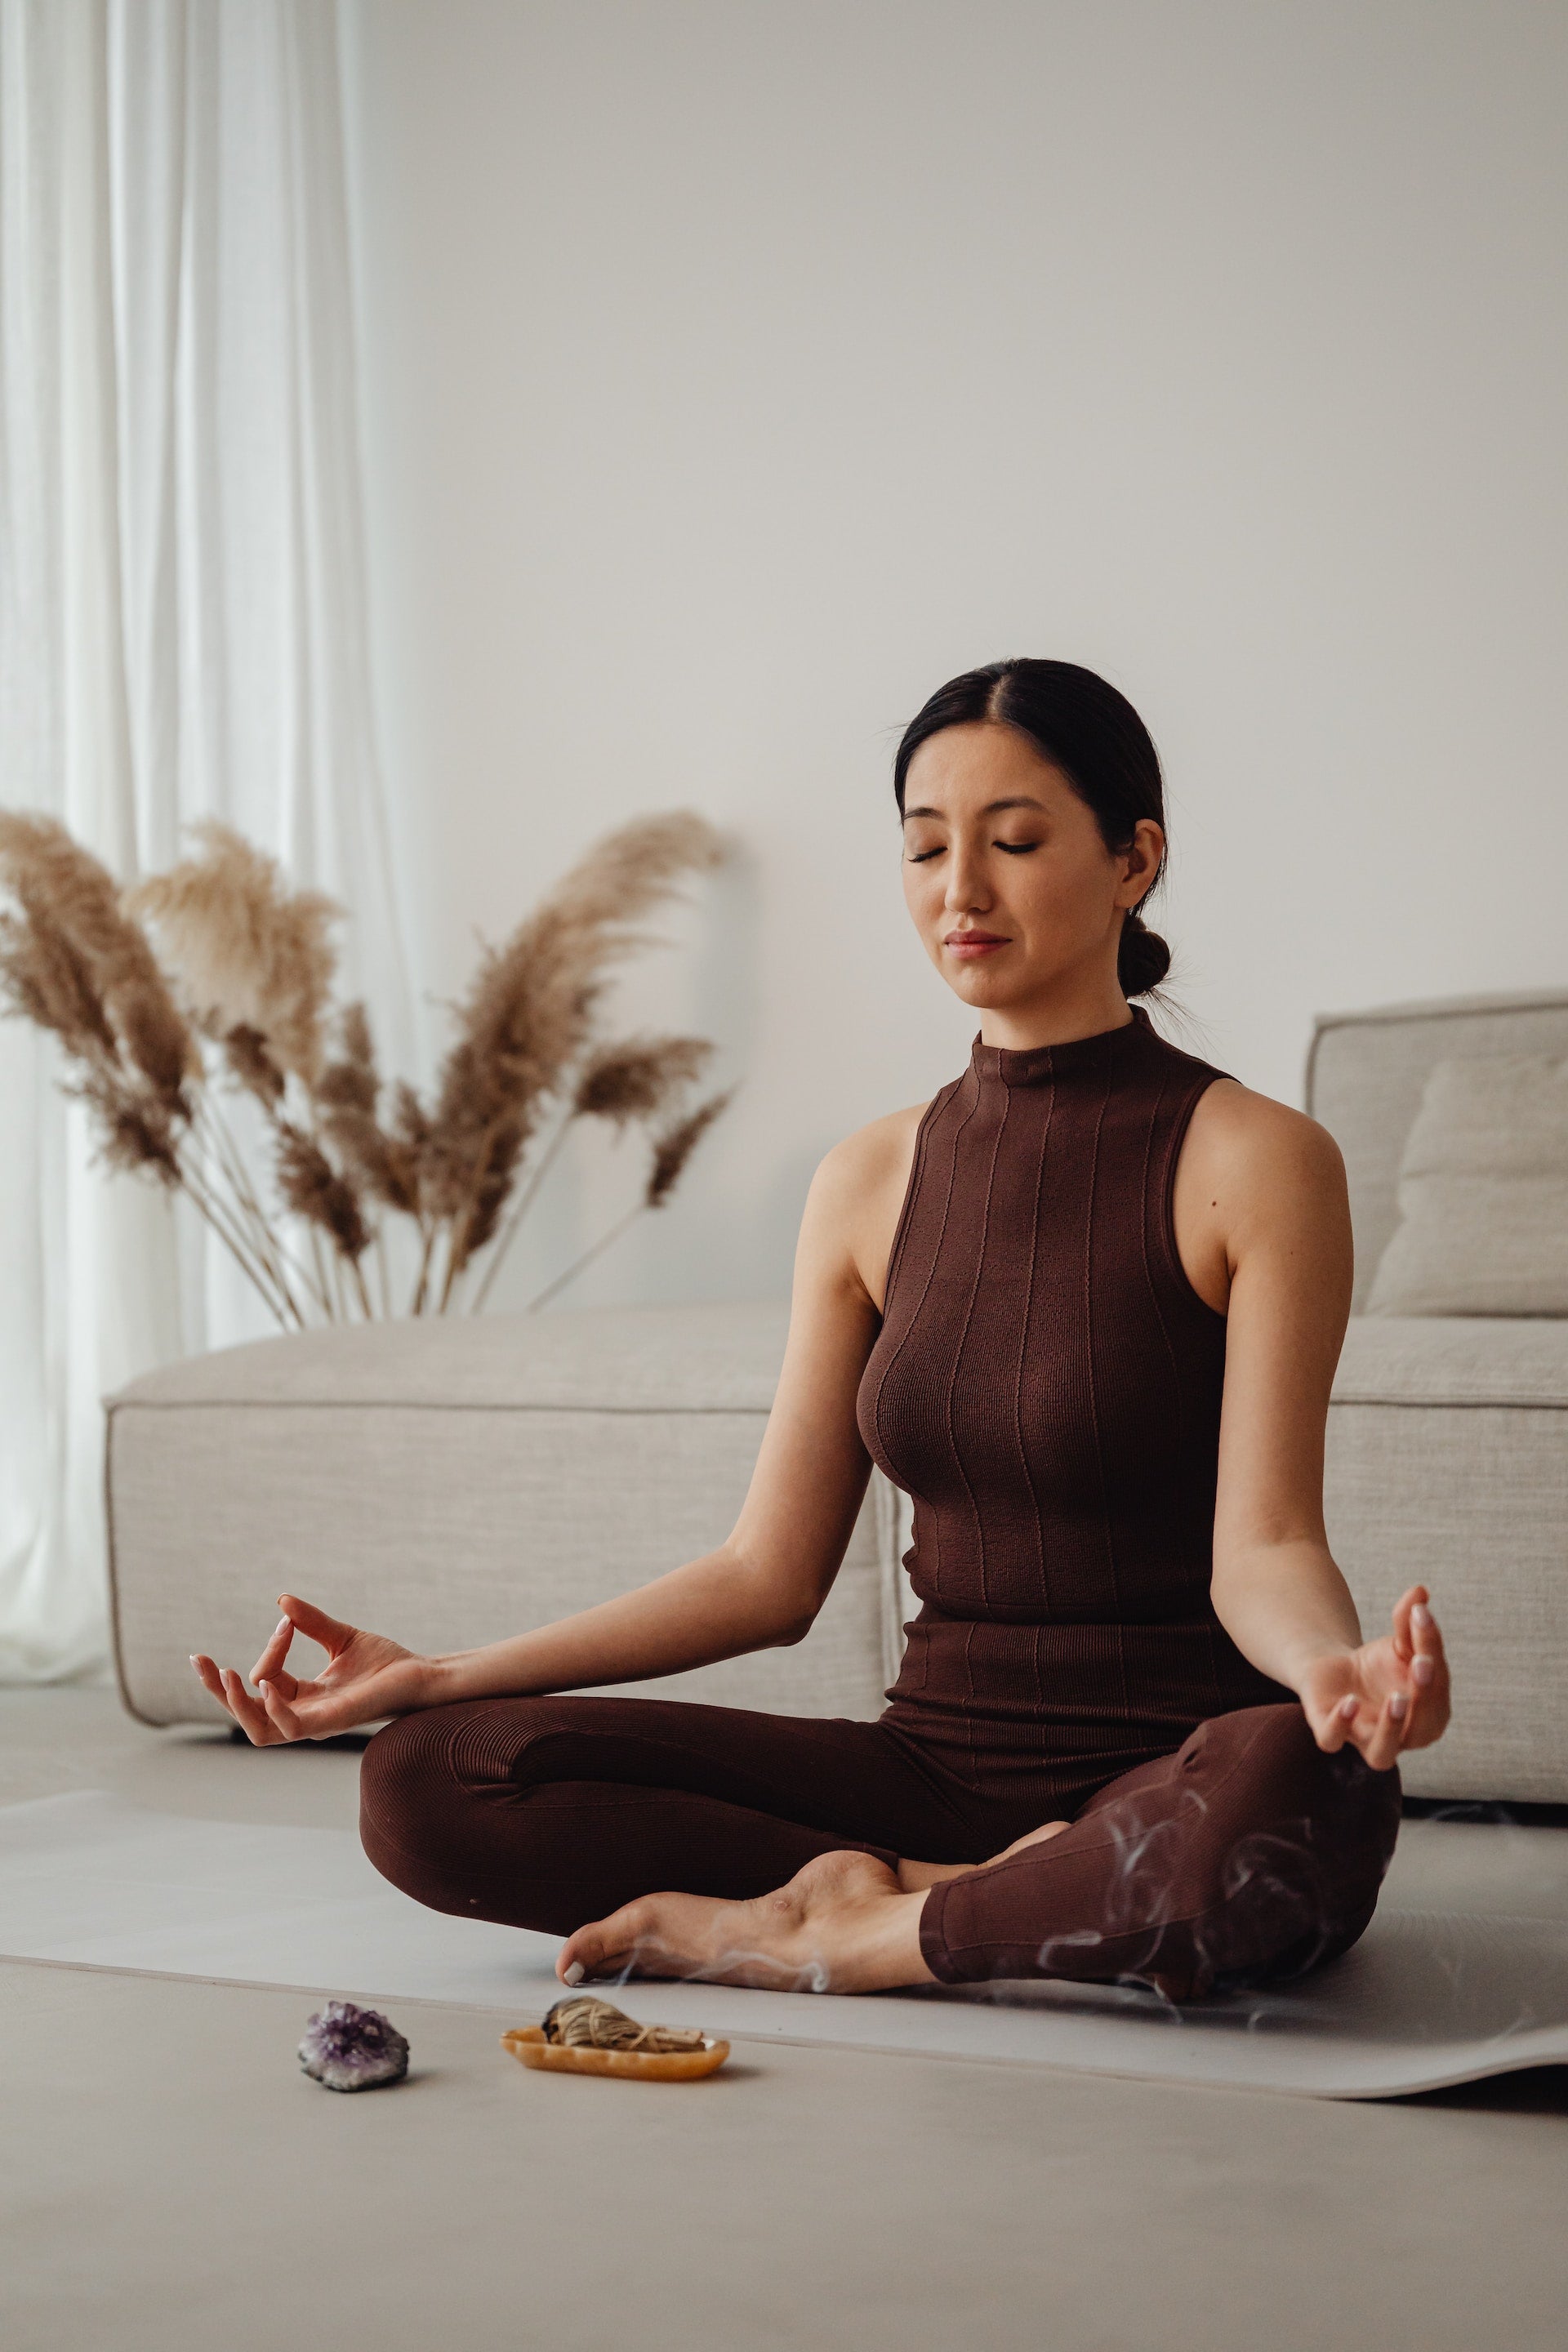 Dark-haired woman wearing a brown workout outfit meditating peacefully